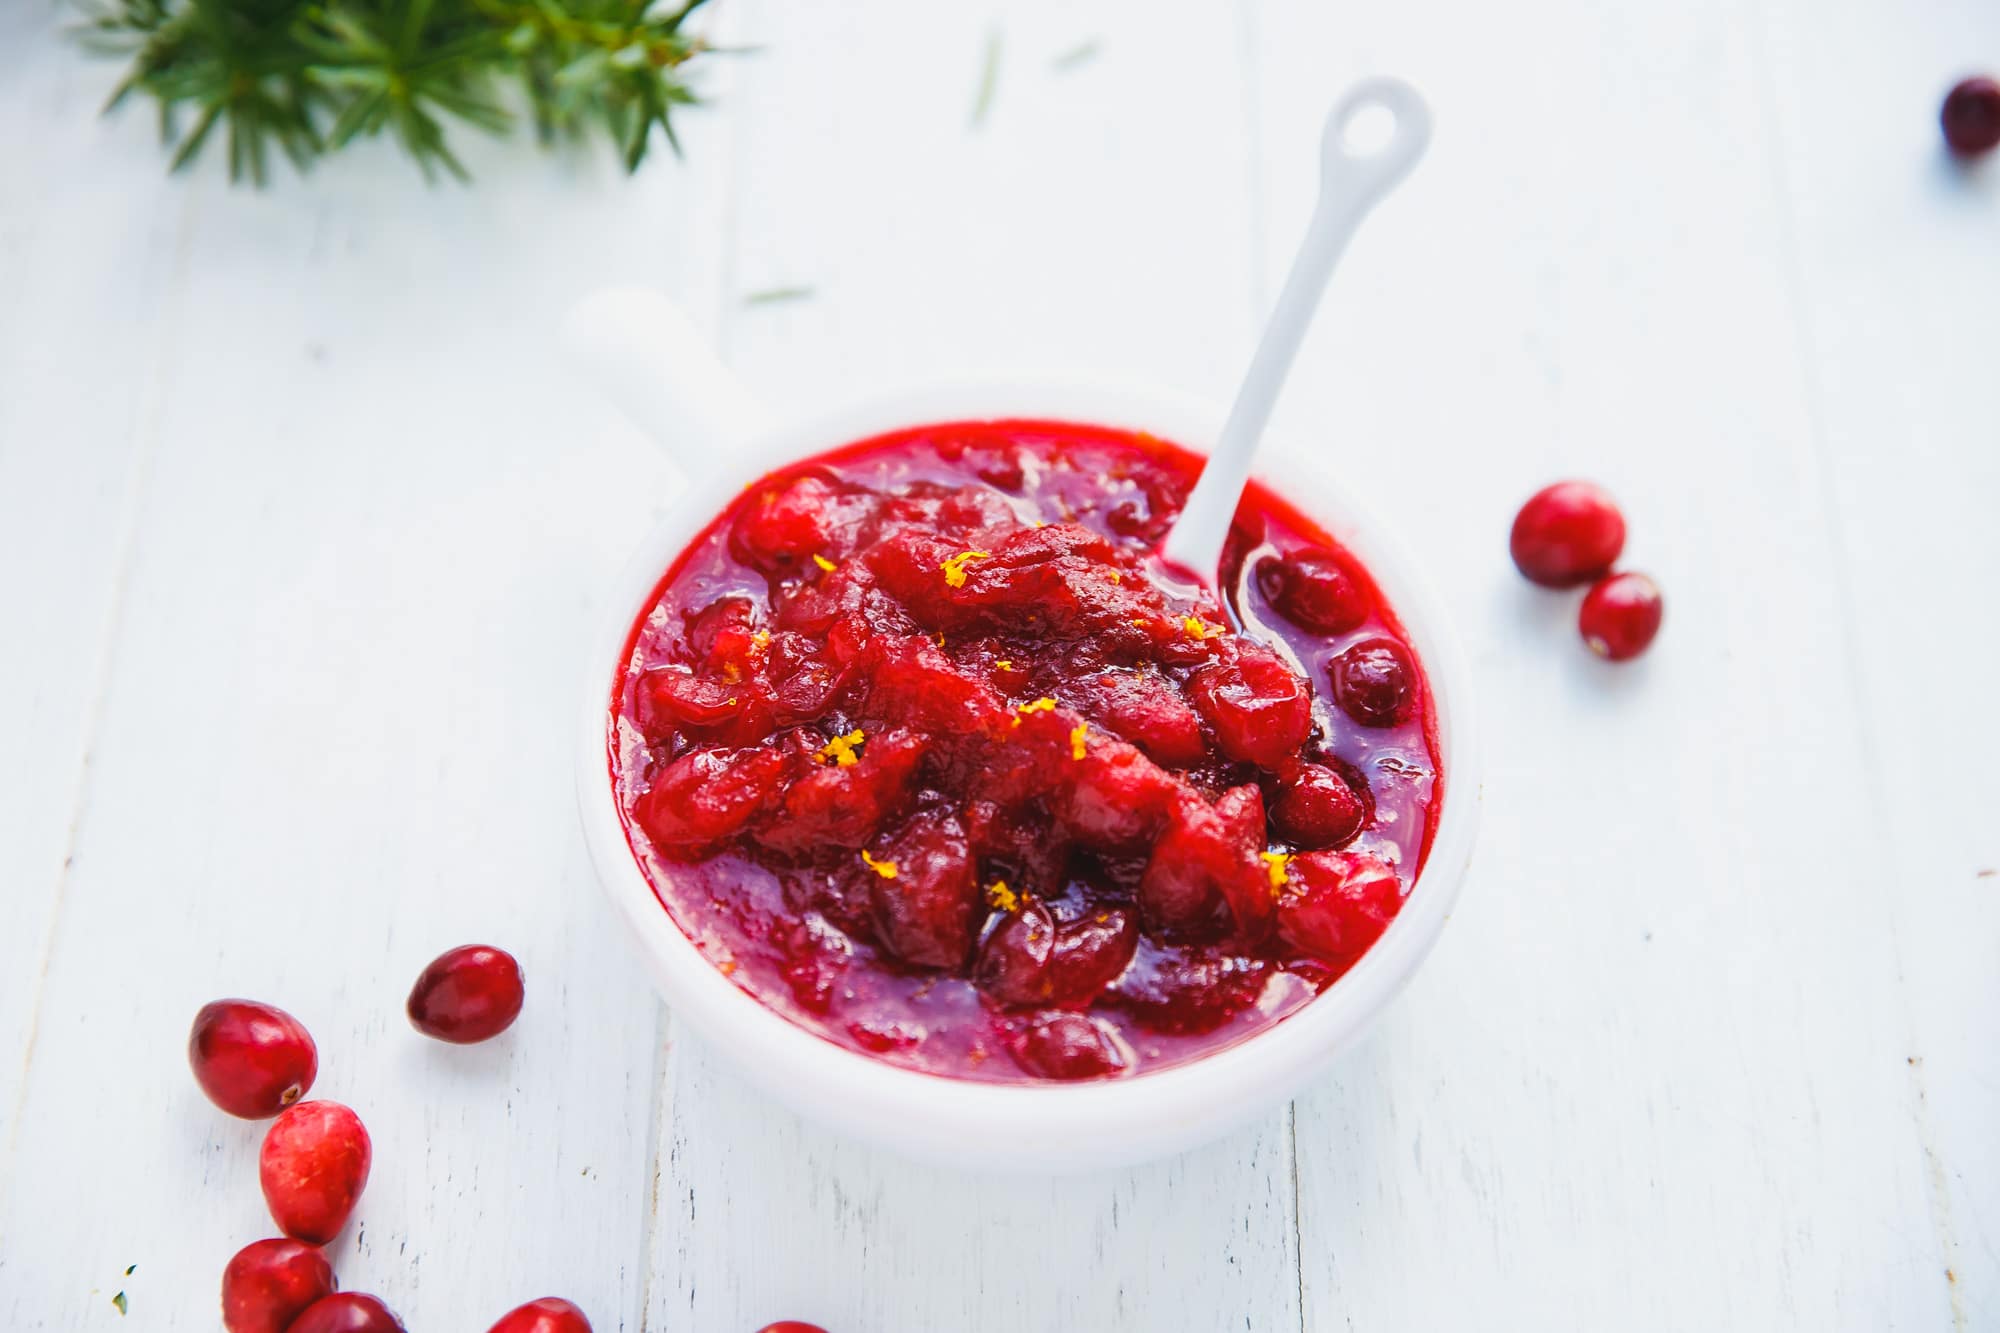 Homemade Cranberry Sauce (Sugar-Free) - Eat the Gains